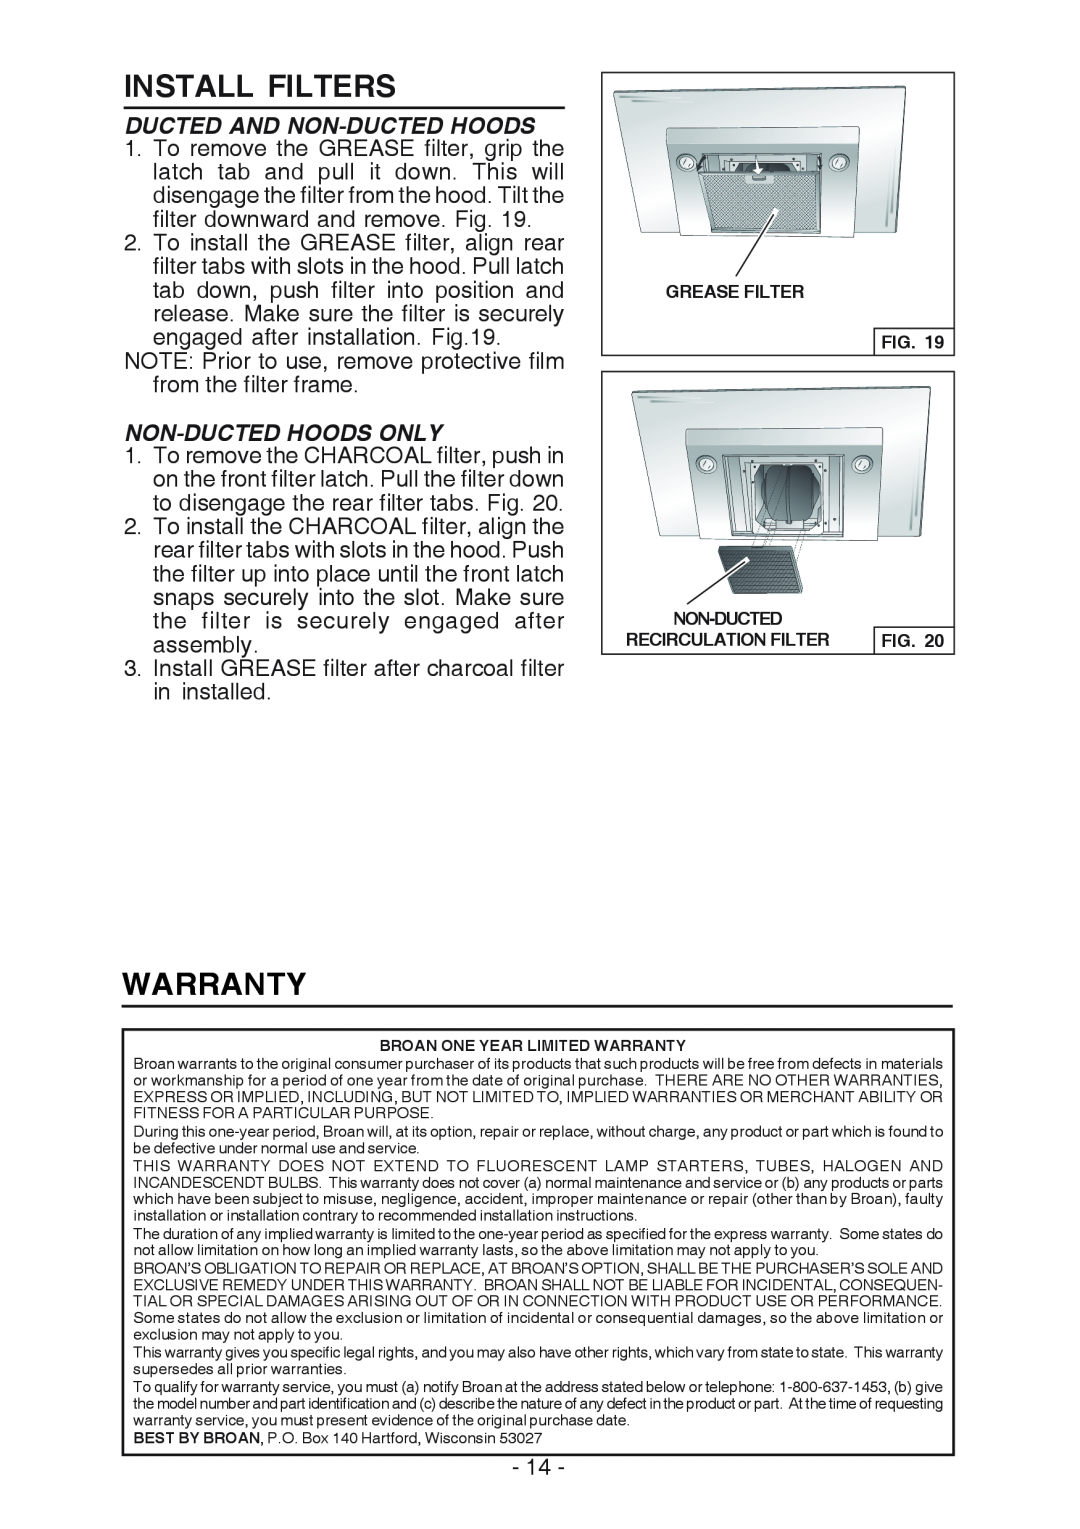 Broan WC26I manual Install Filters, Warranty, Non-Ducted Hoods Only, Ducted And Non-Ducted Hoods 